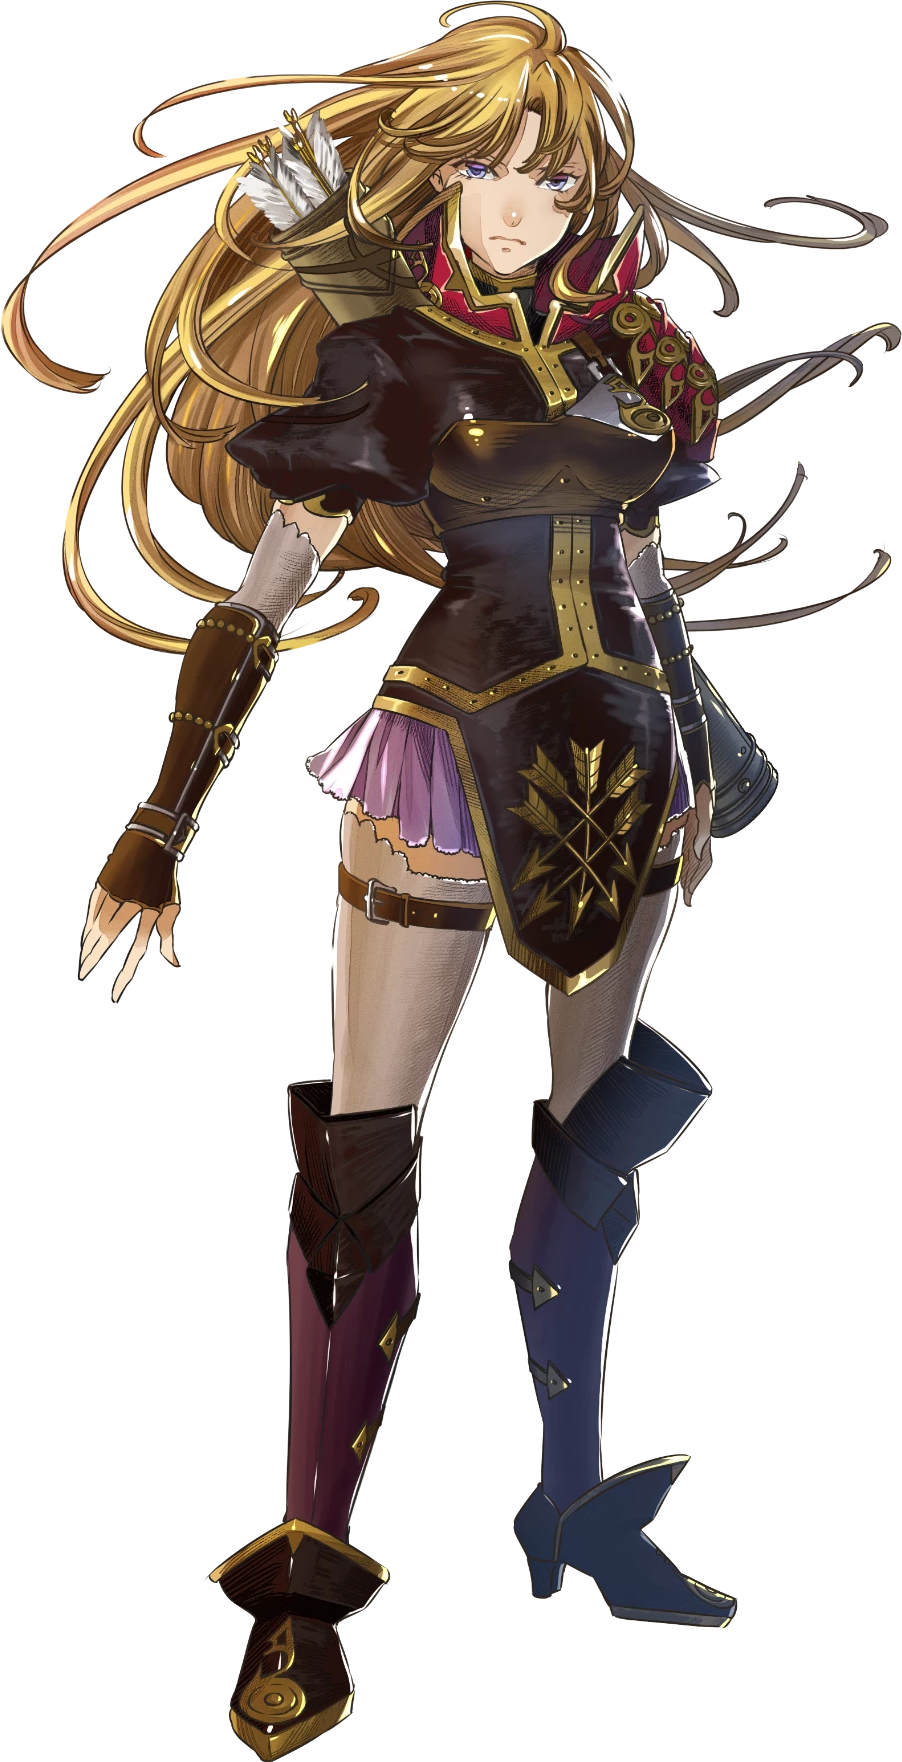 Clarisse's portrait from Heroes. An intense blonde woman staring at the audience, wearing a brown armored tunic with a high red collar and a quiver. Her hair flows around her.